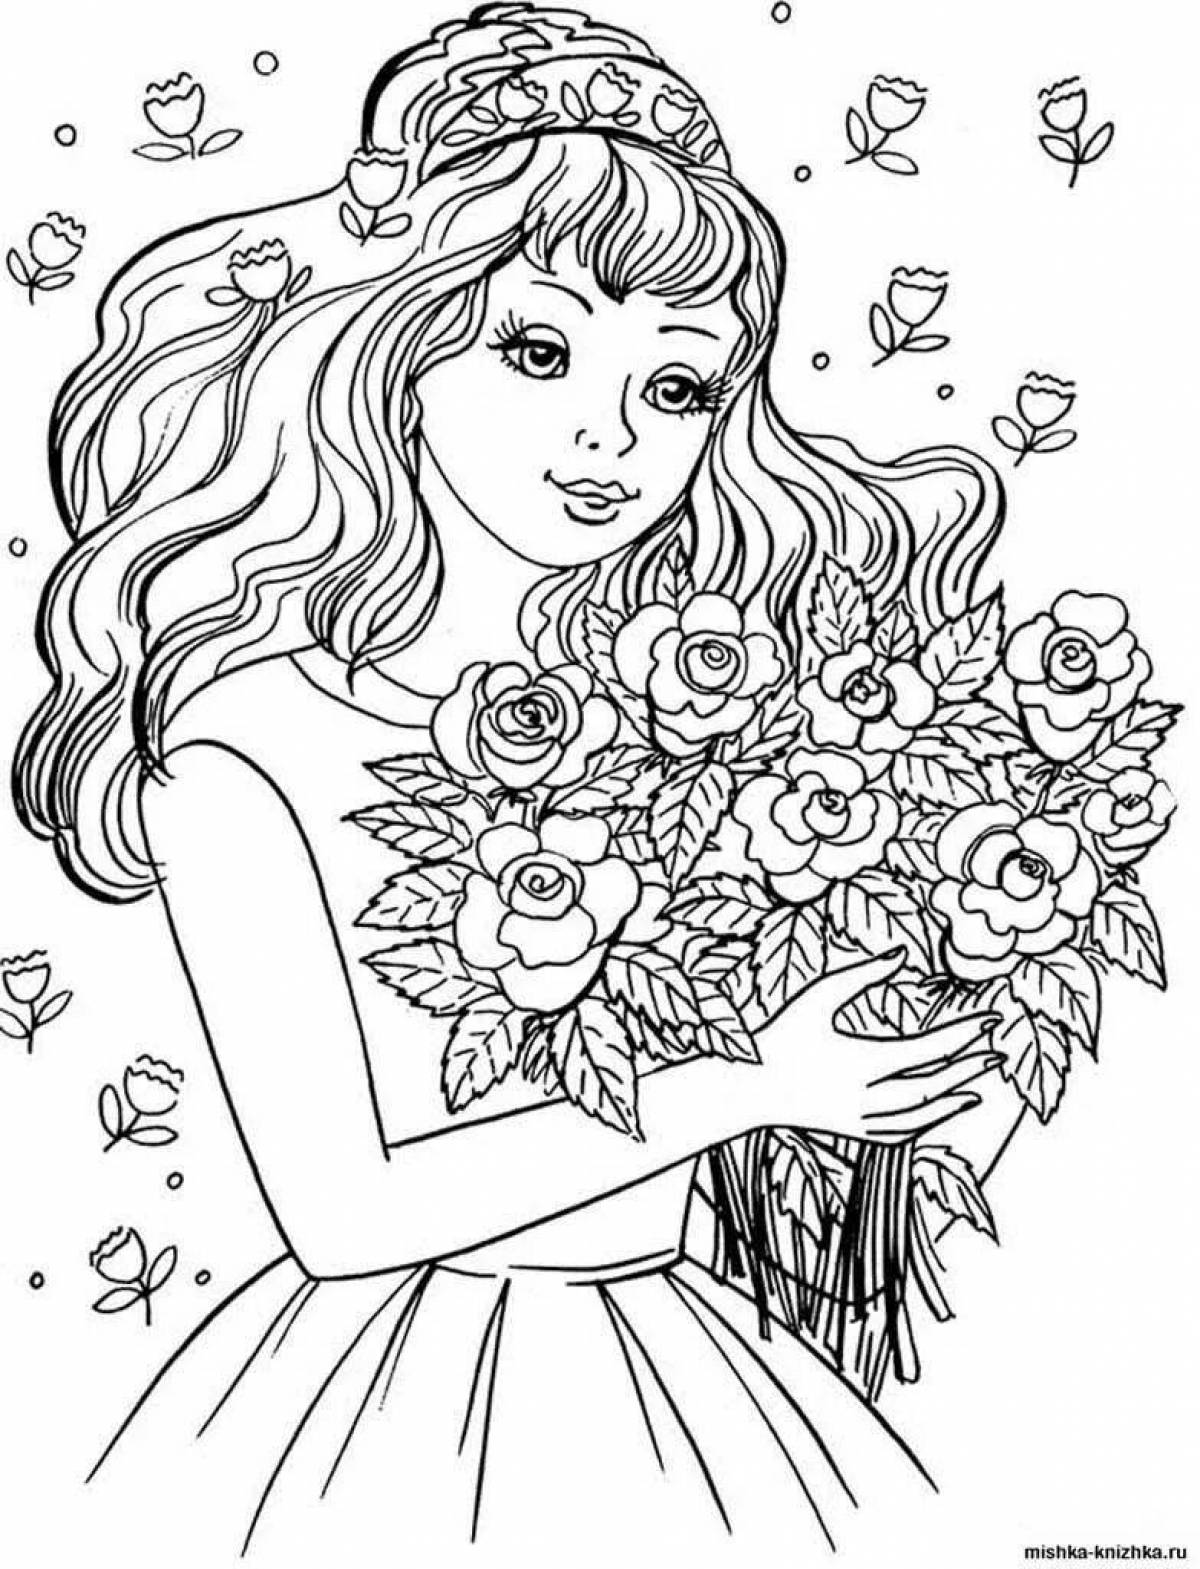 Fun coloring book for 9 year old girls